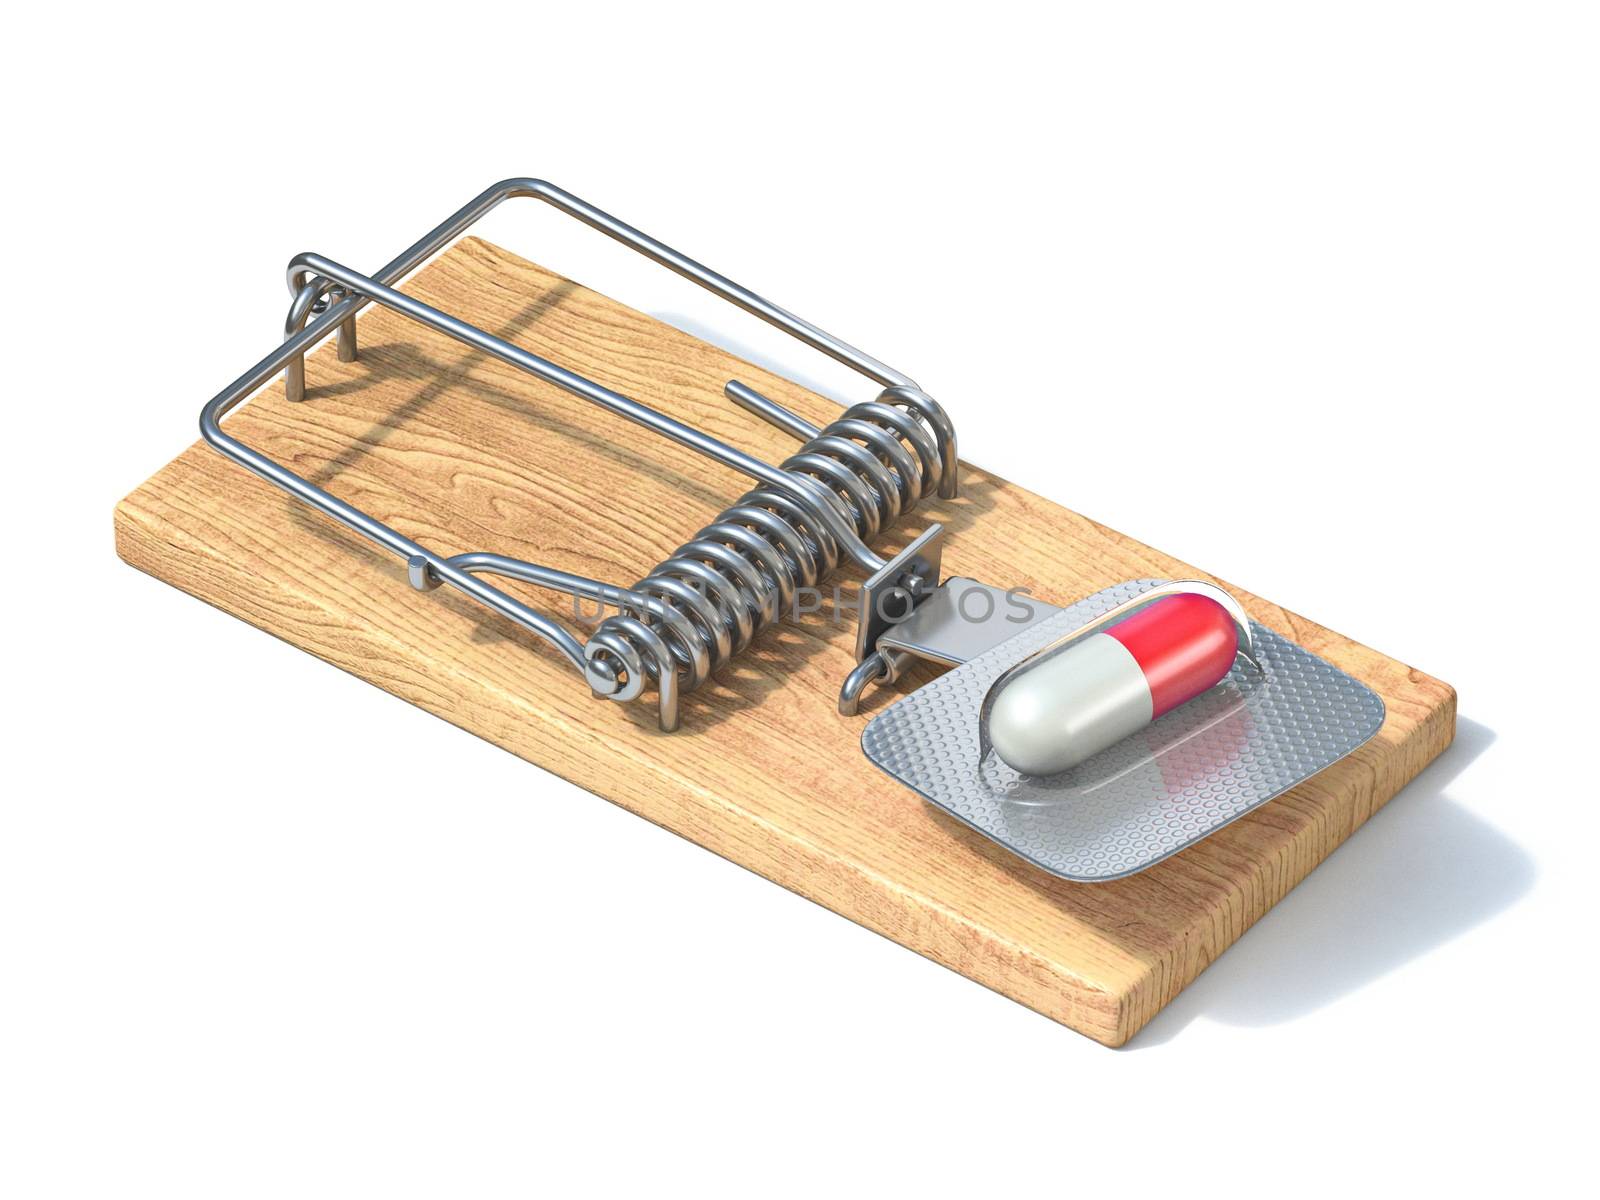 Pill in mousetrap 3D render illustration isolated on white background